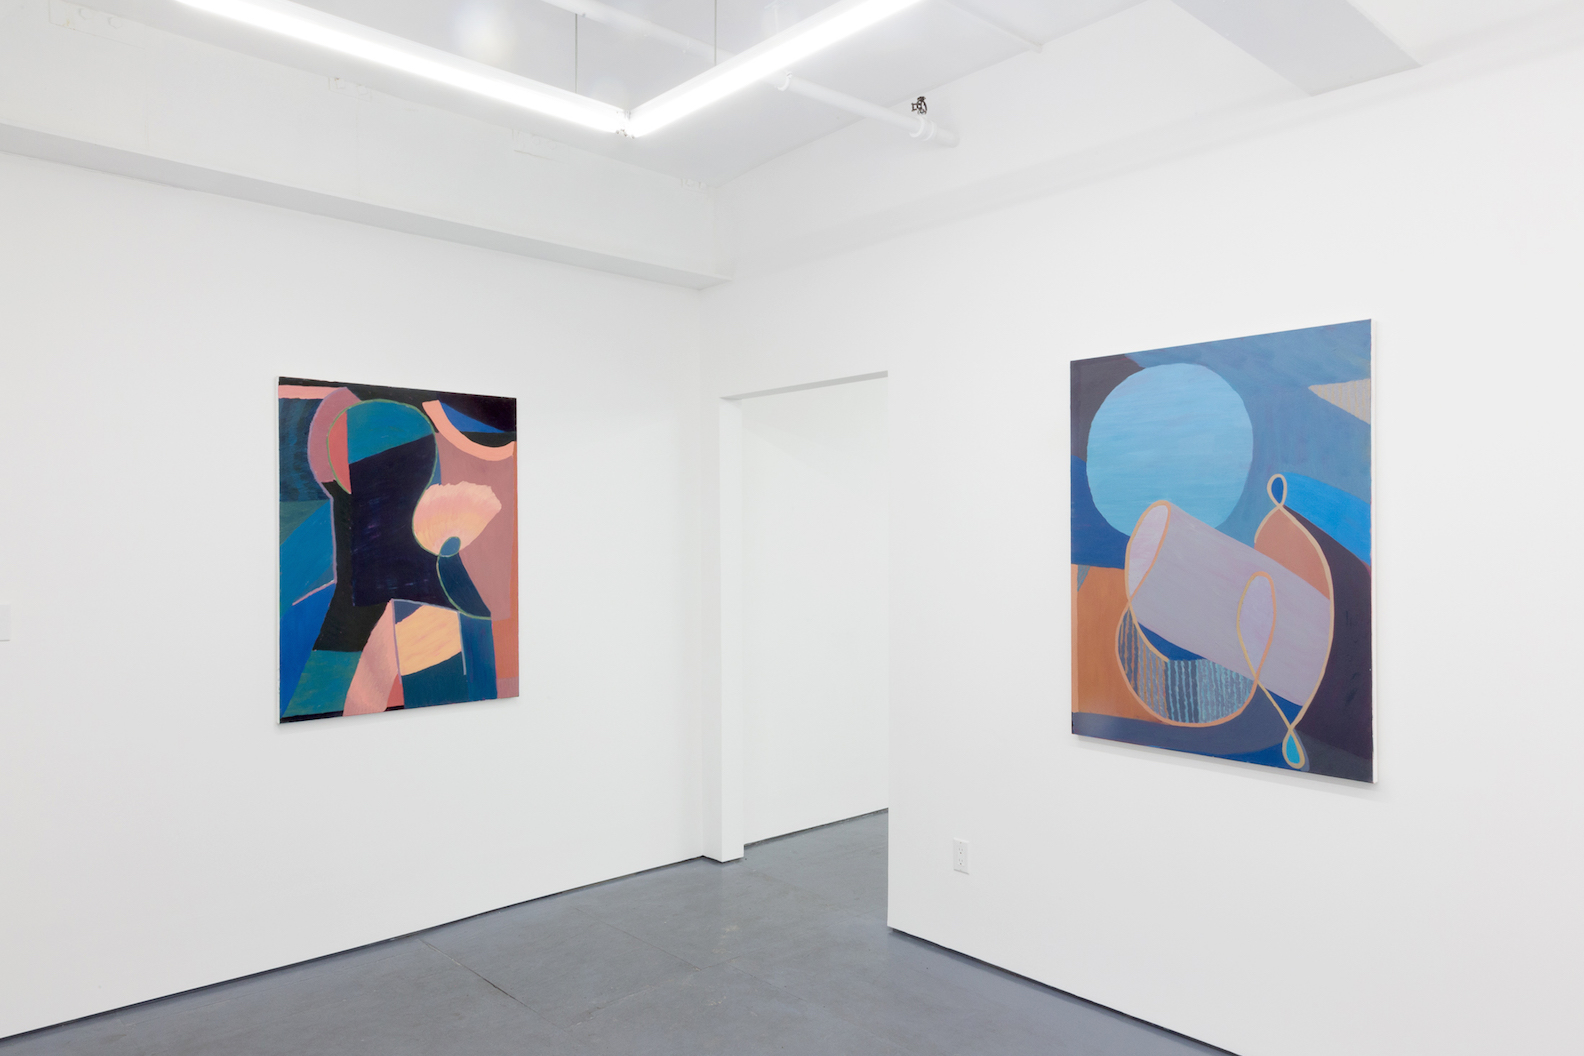  Installation view of the exhibition Armature by Liz Ainslie at Transmitter 